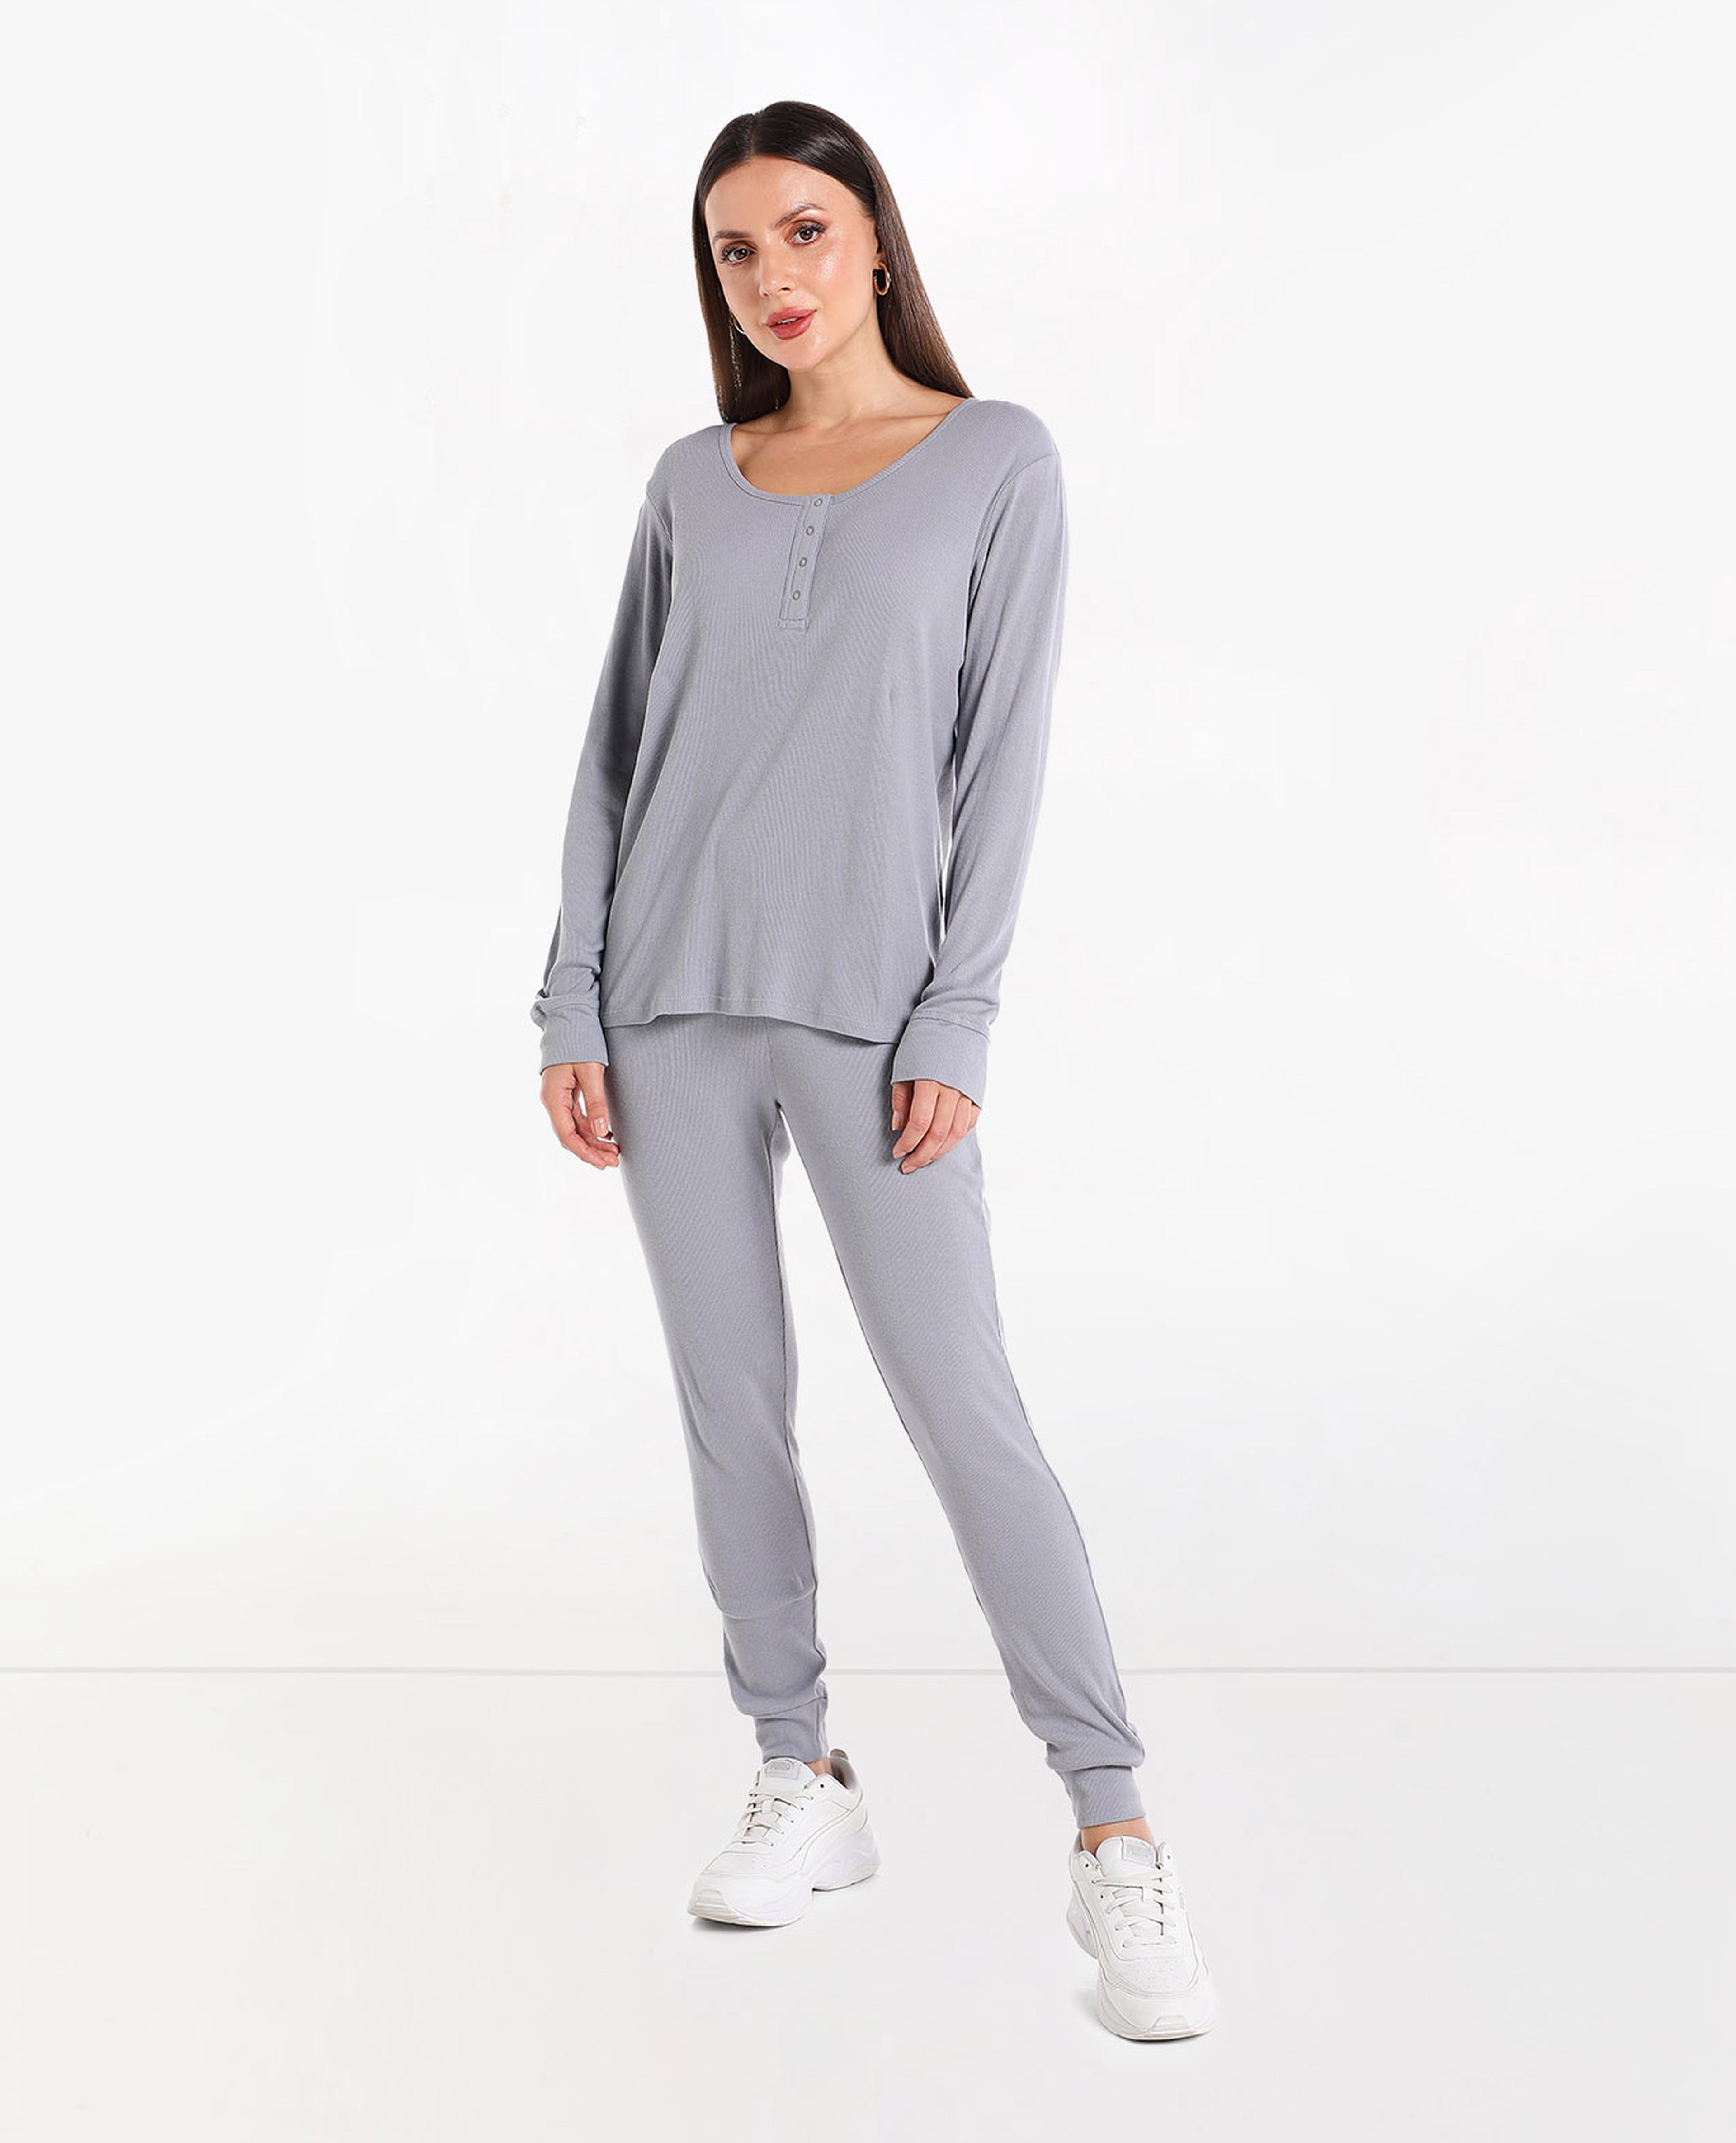 Solid T-Shirt and Pajama Night Suit Set